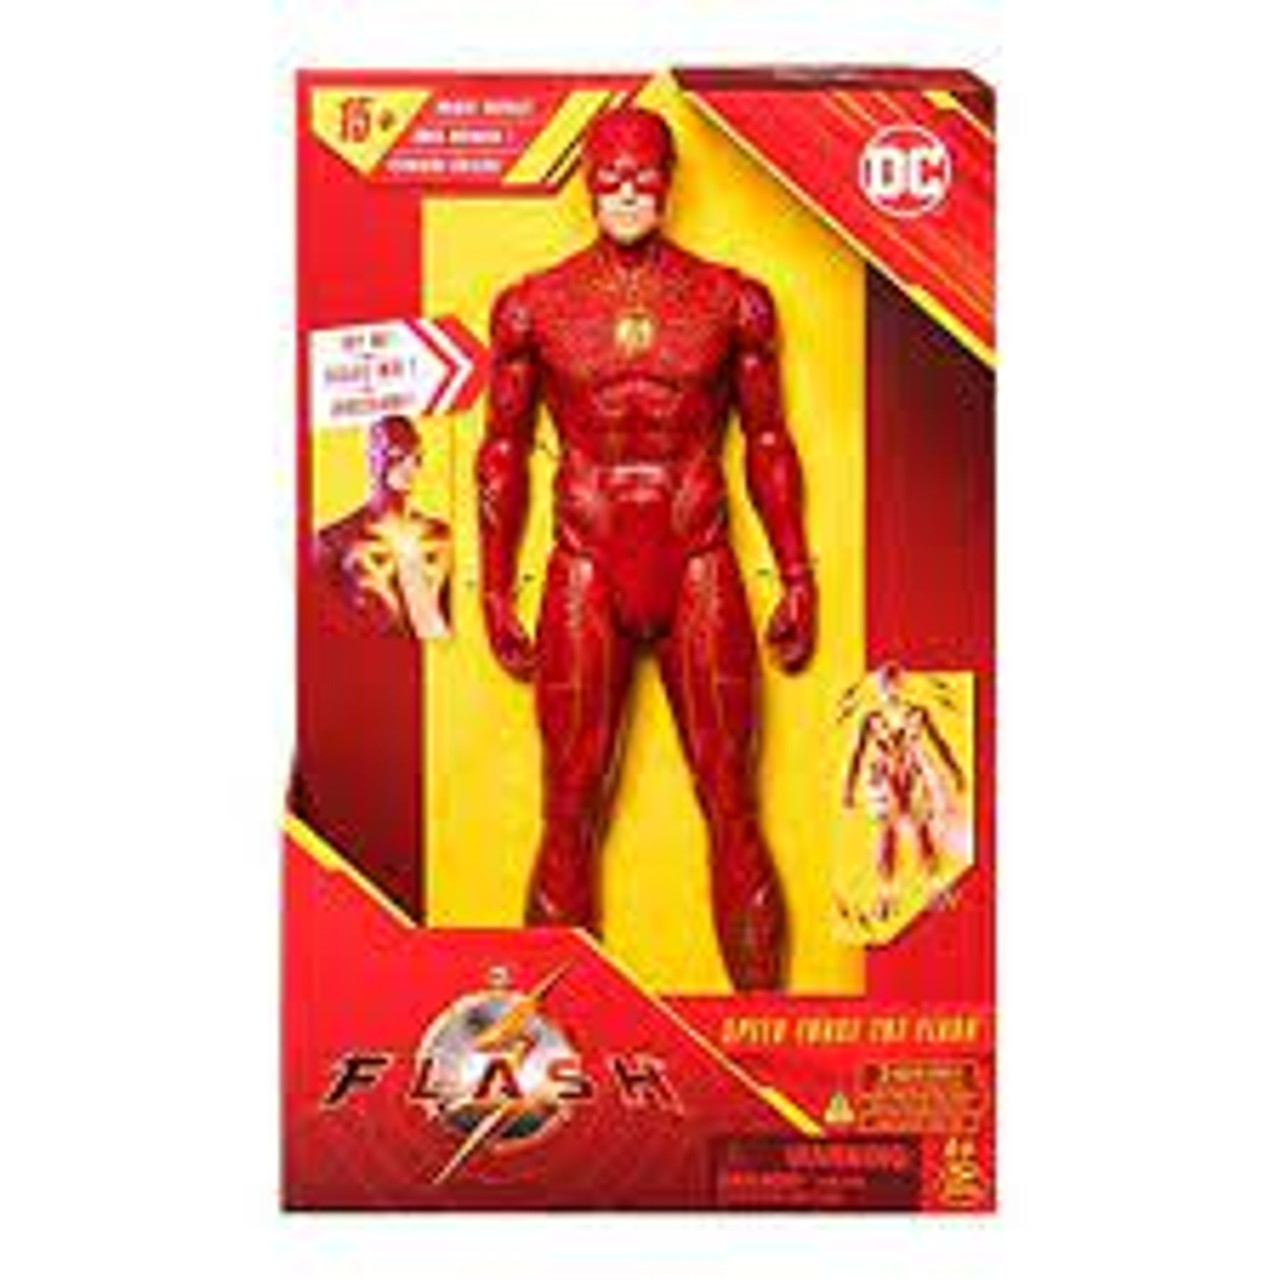 DC THE FLASH FEATURE FIGURE 12”